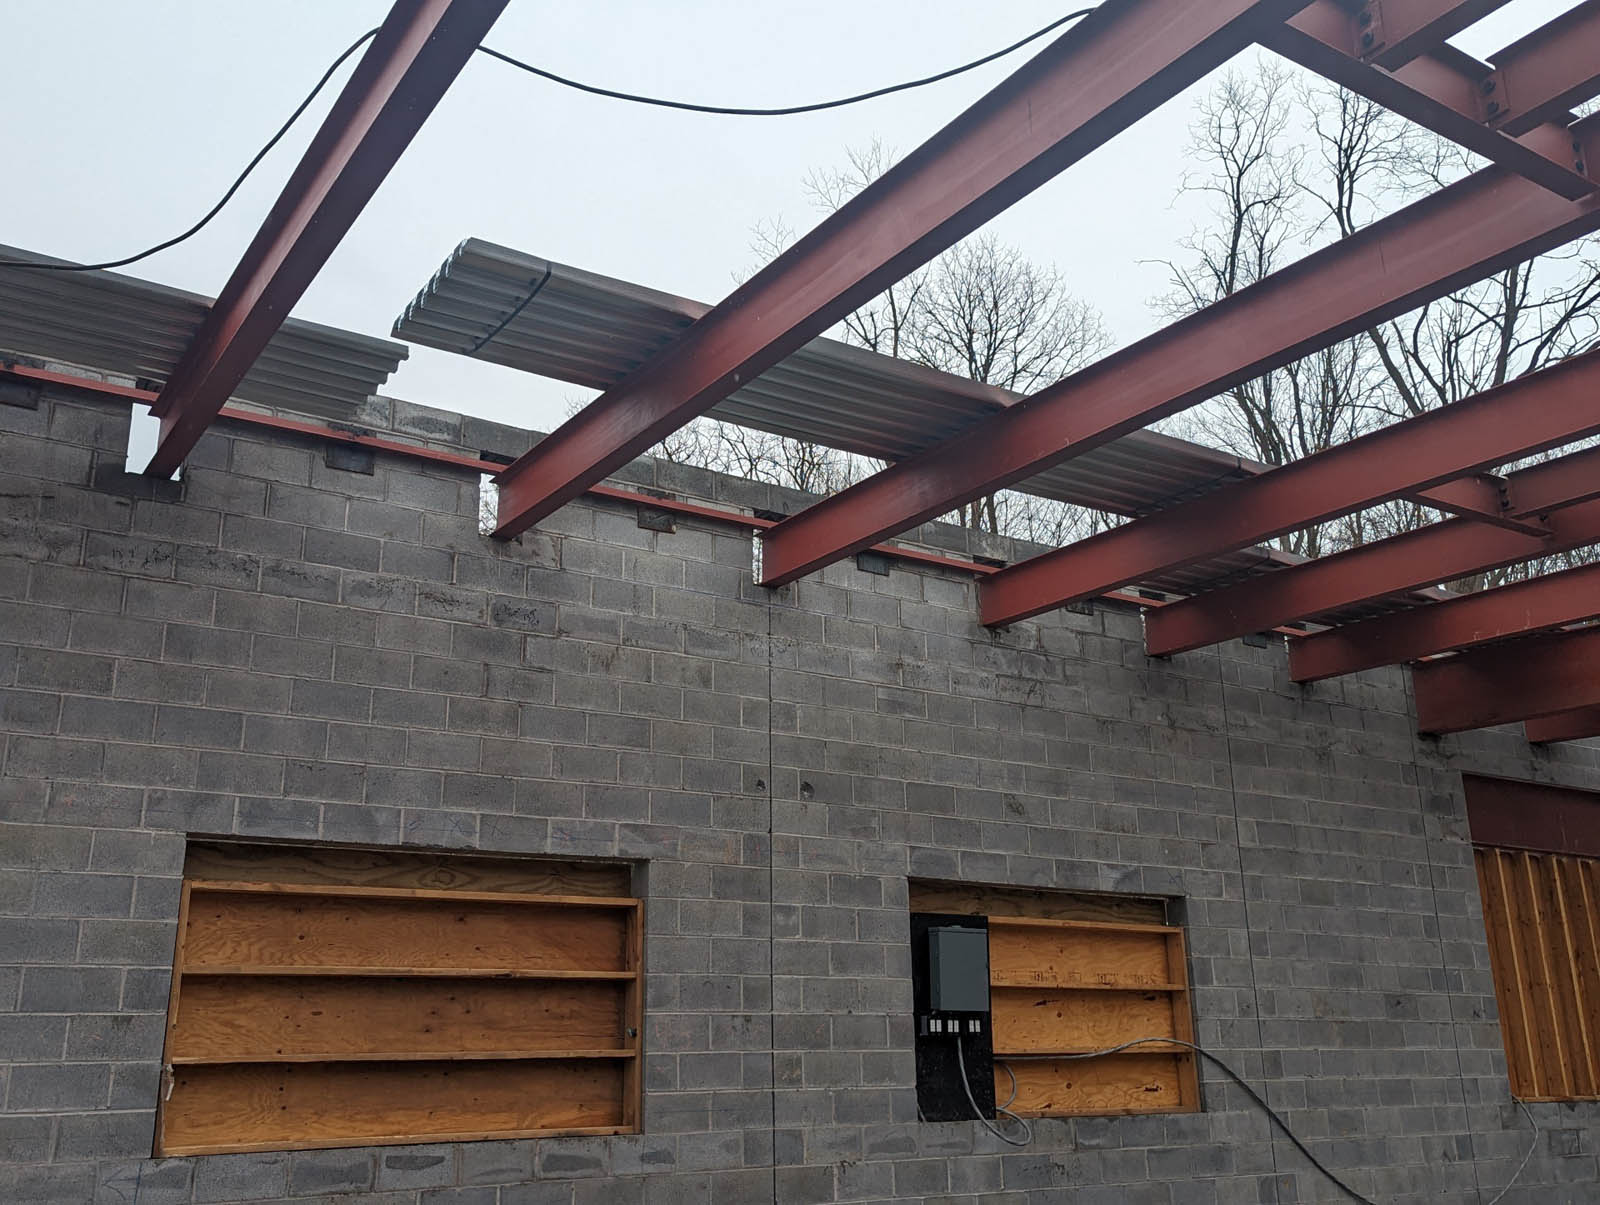 March 13, 2023 - Roof Steel